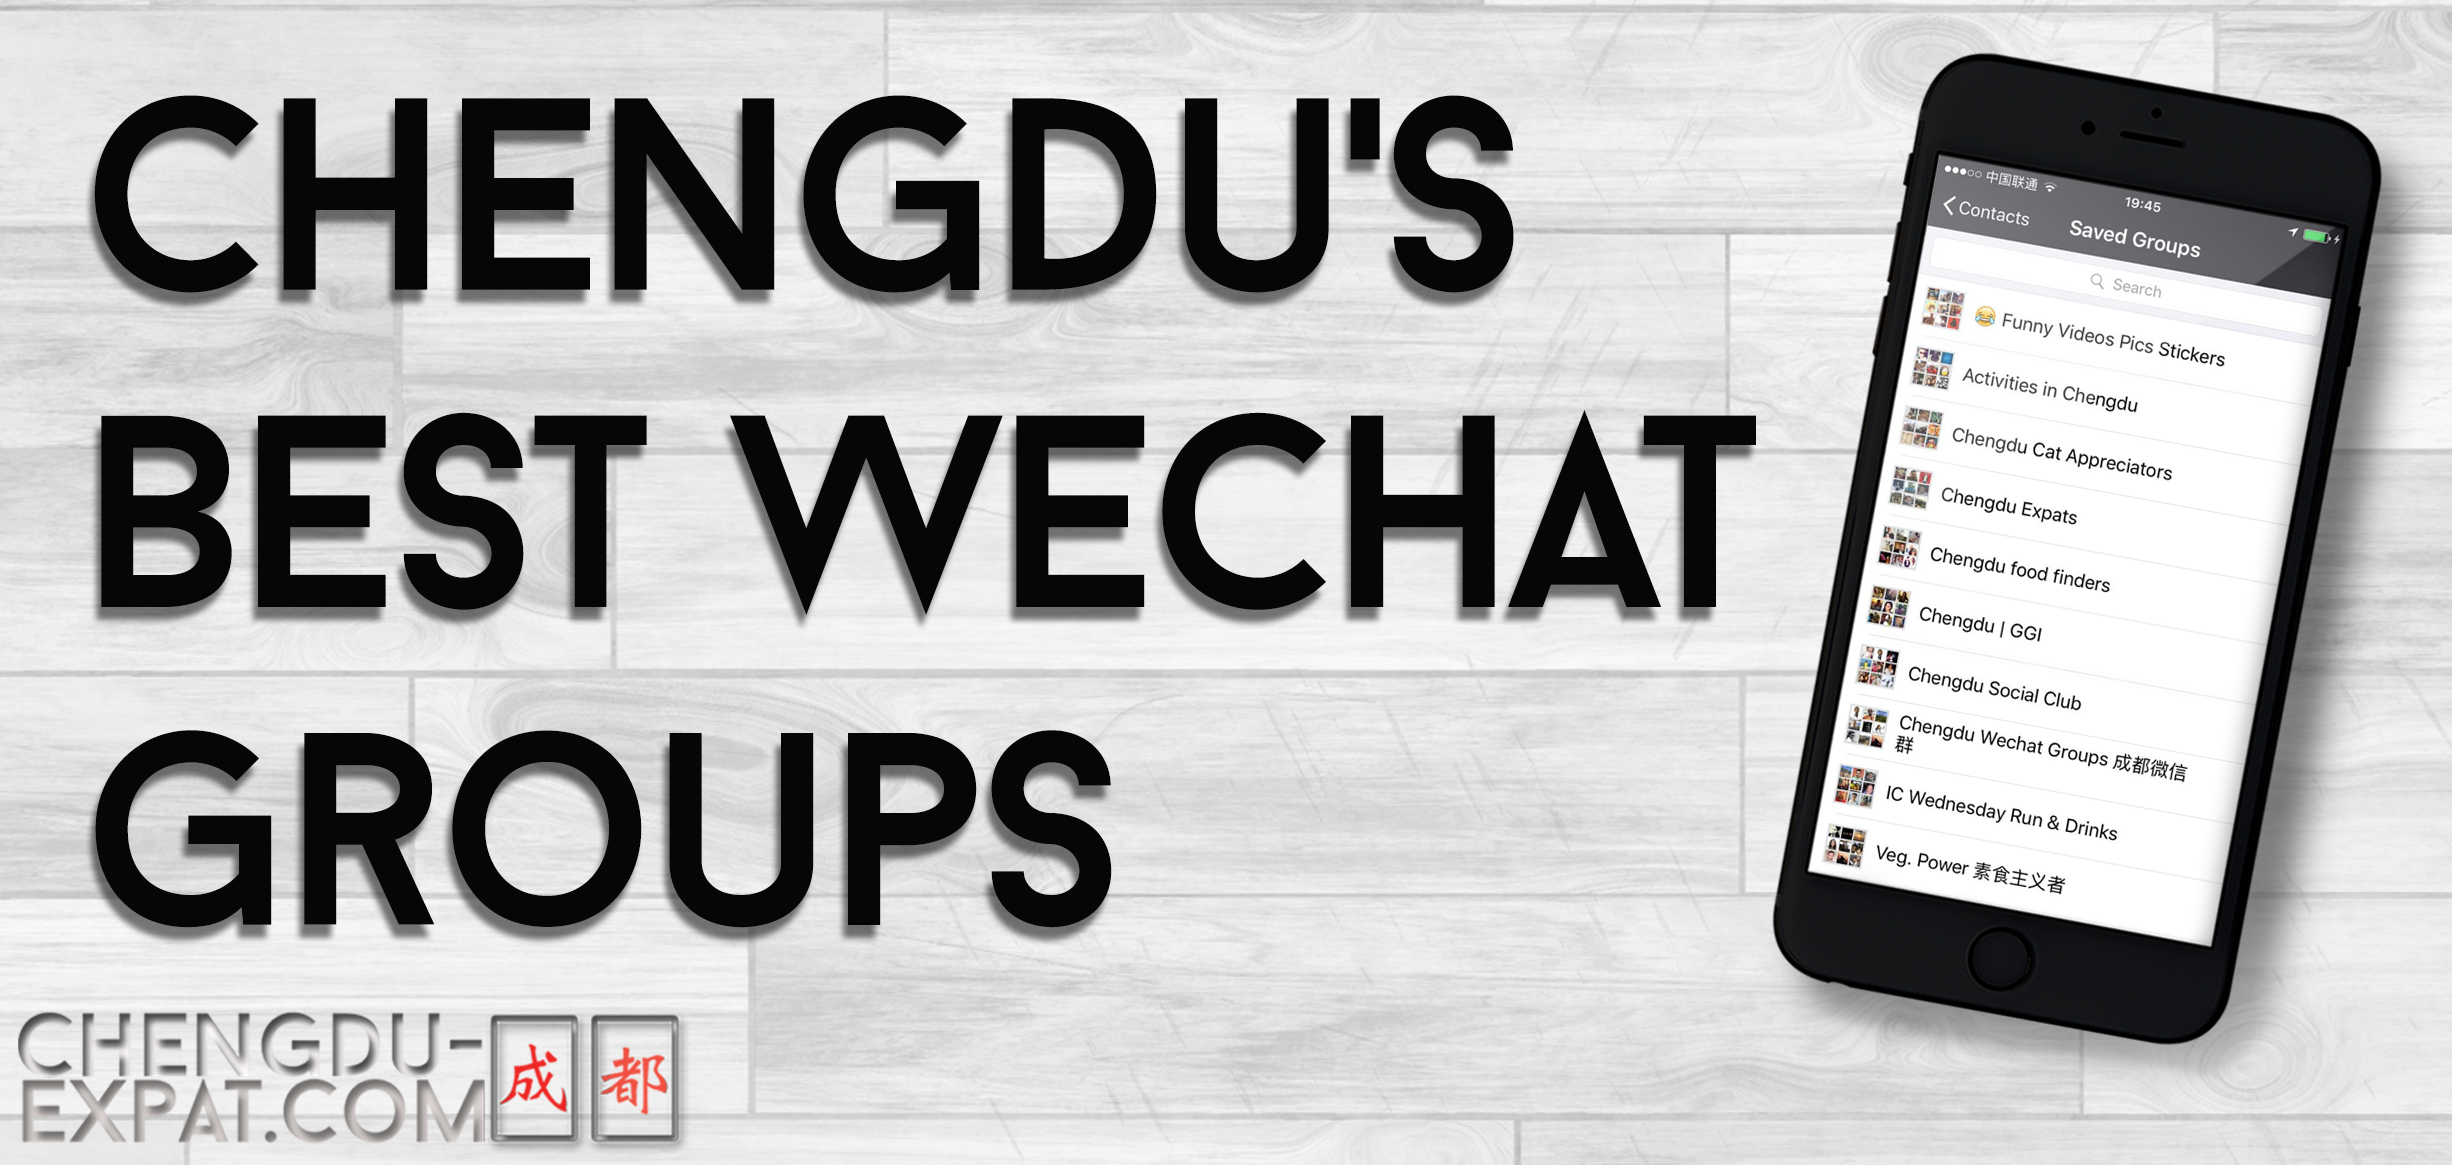 Here is a list of Chengdus best WeChat groups in 2020, from useful info